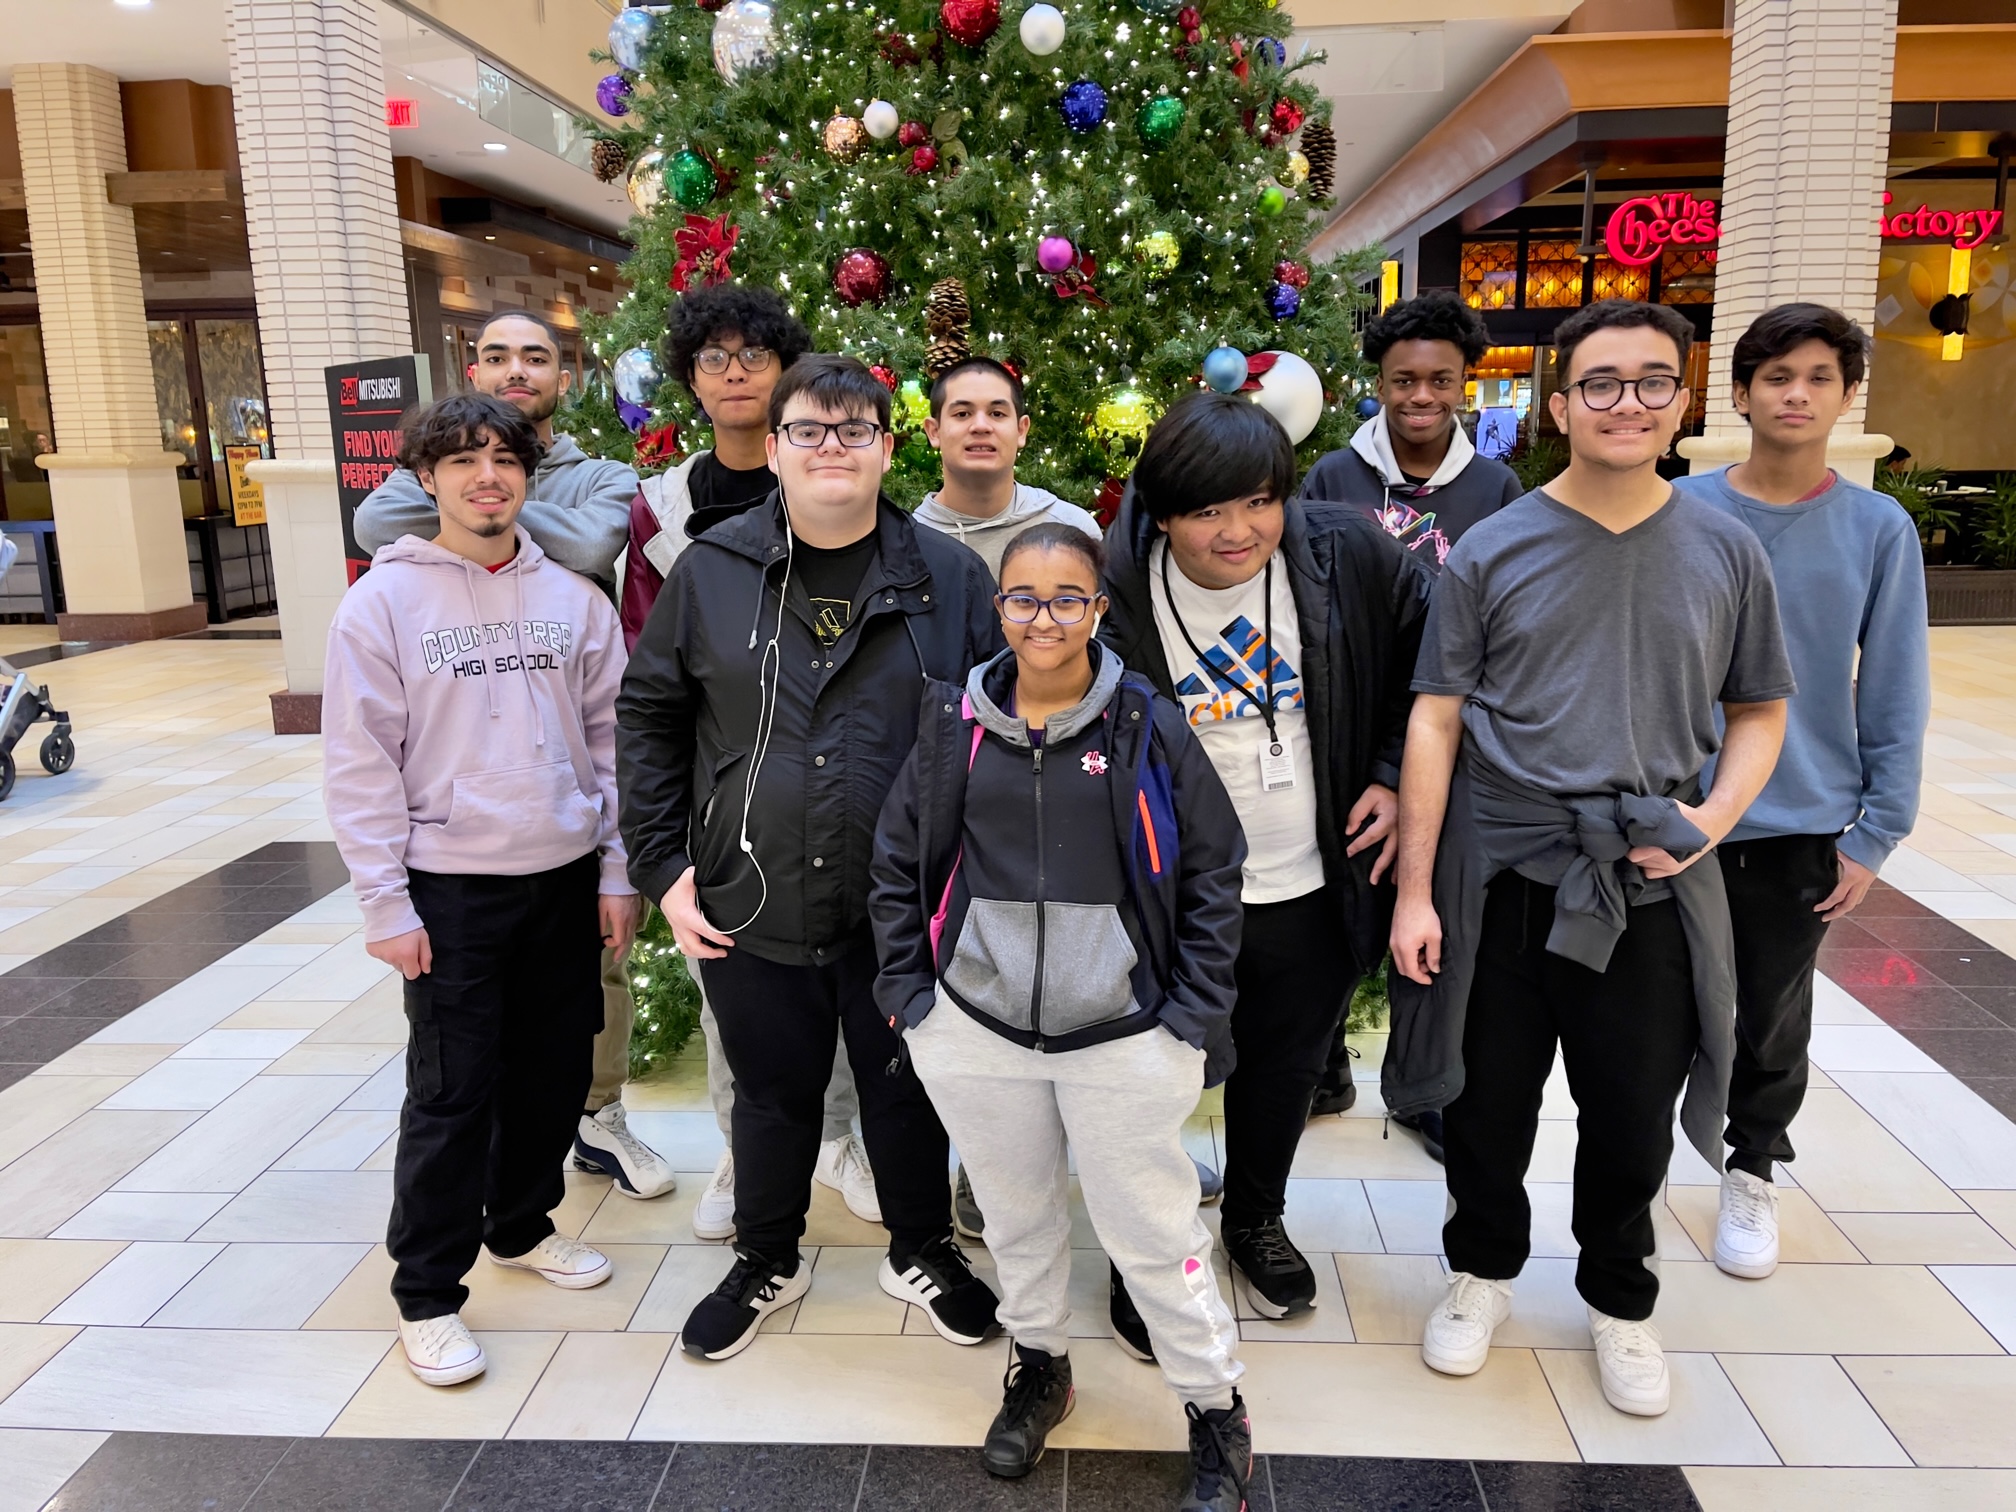 Work-Based Learning Experience at Newport Center Mall